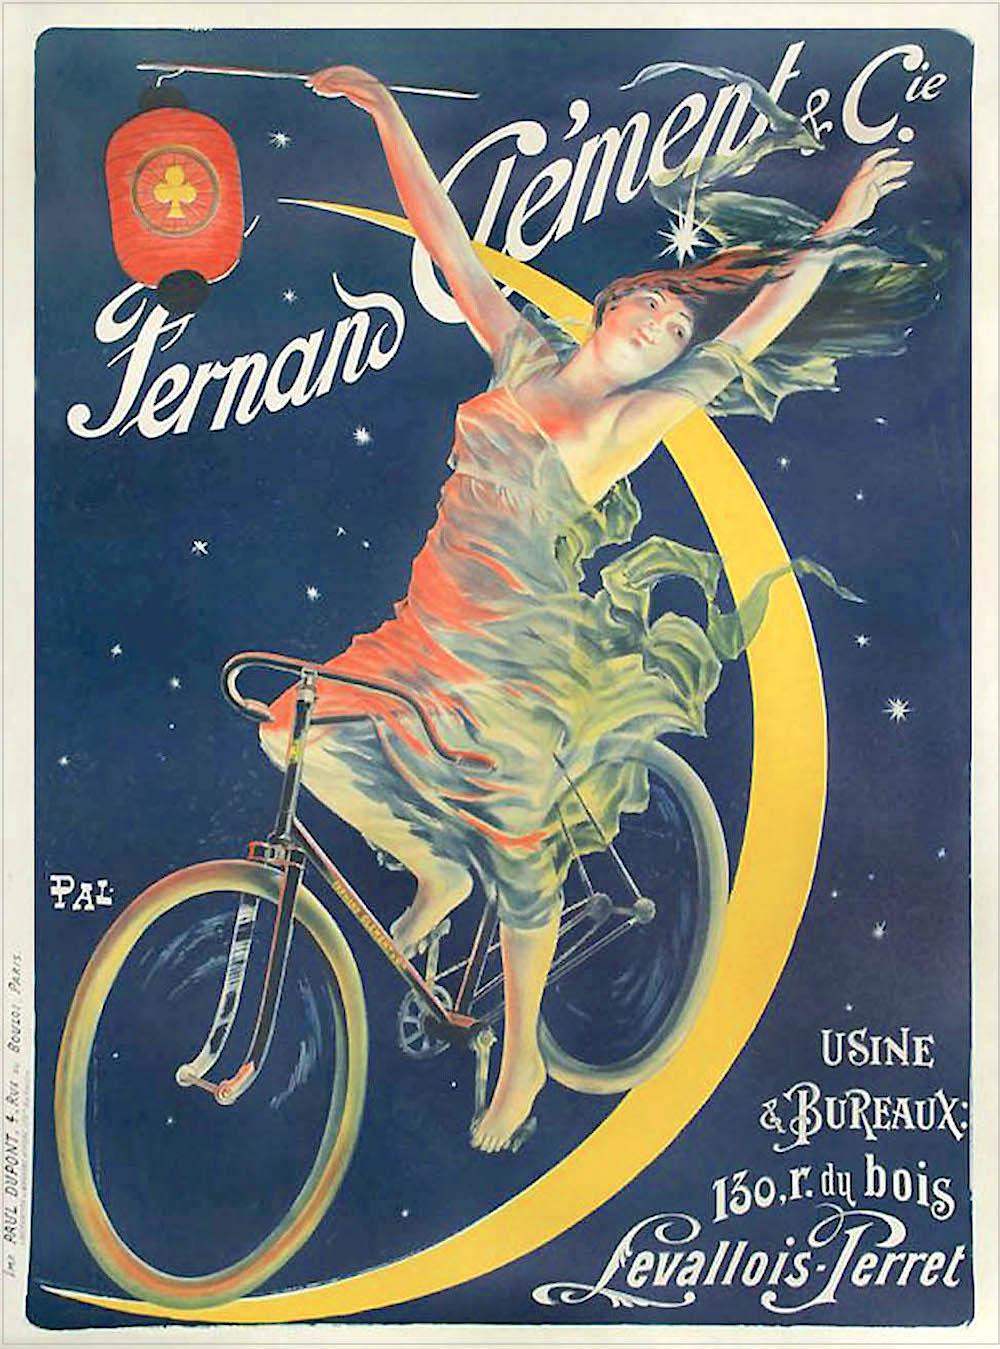 Pal (Jean de Paléologue) Figurative Print - CLÉMENT CYCLES Lithograph, Woman on Bicycle, Moon, French Advertising Art 52"